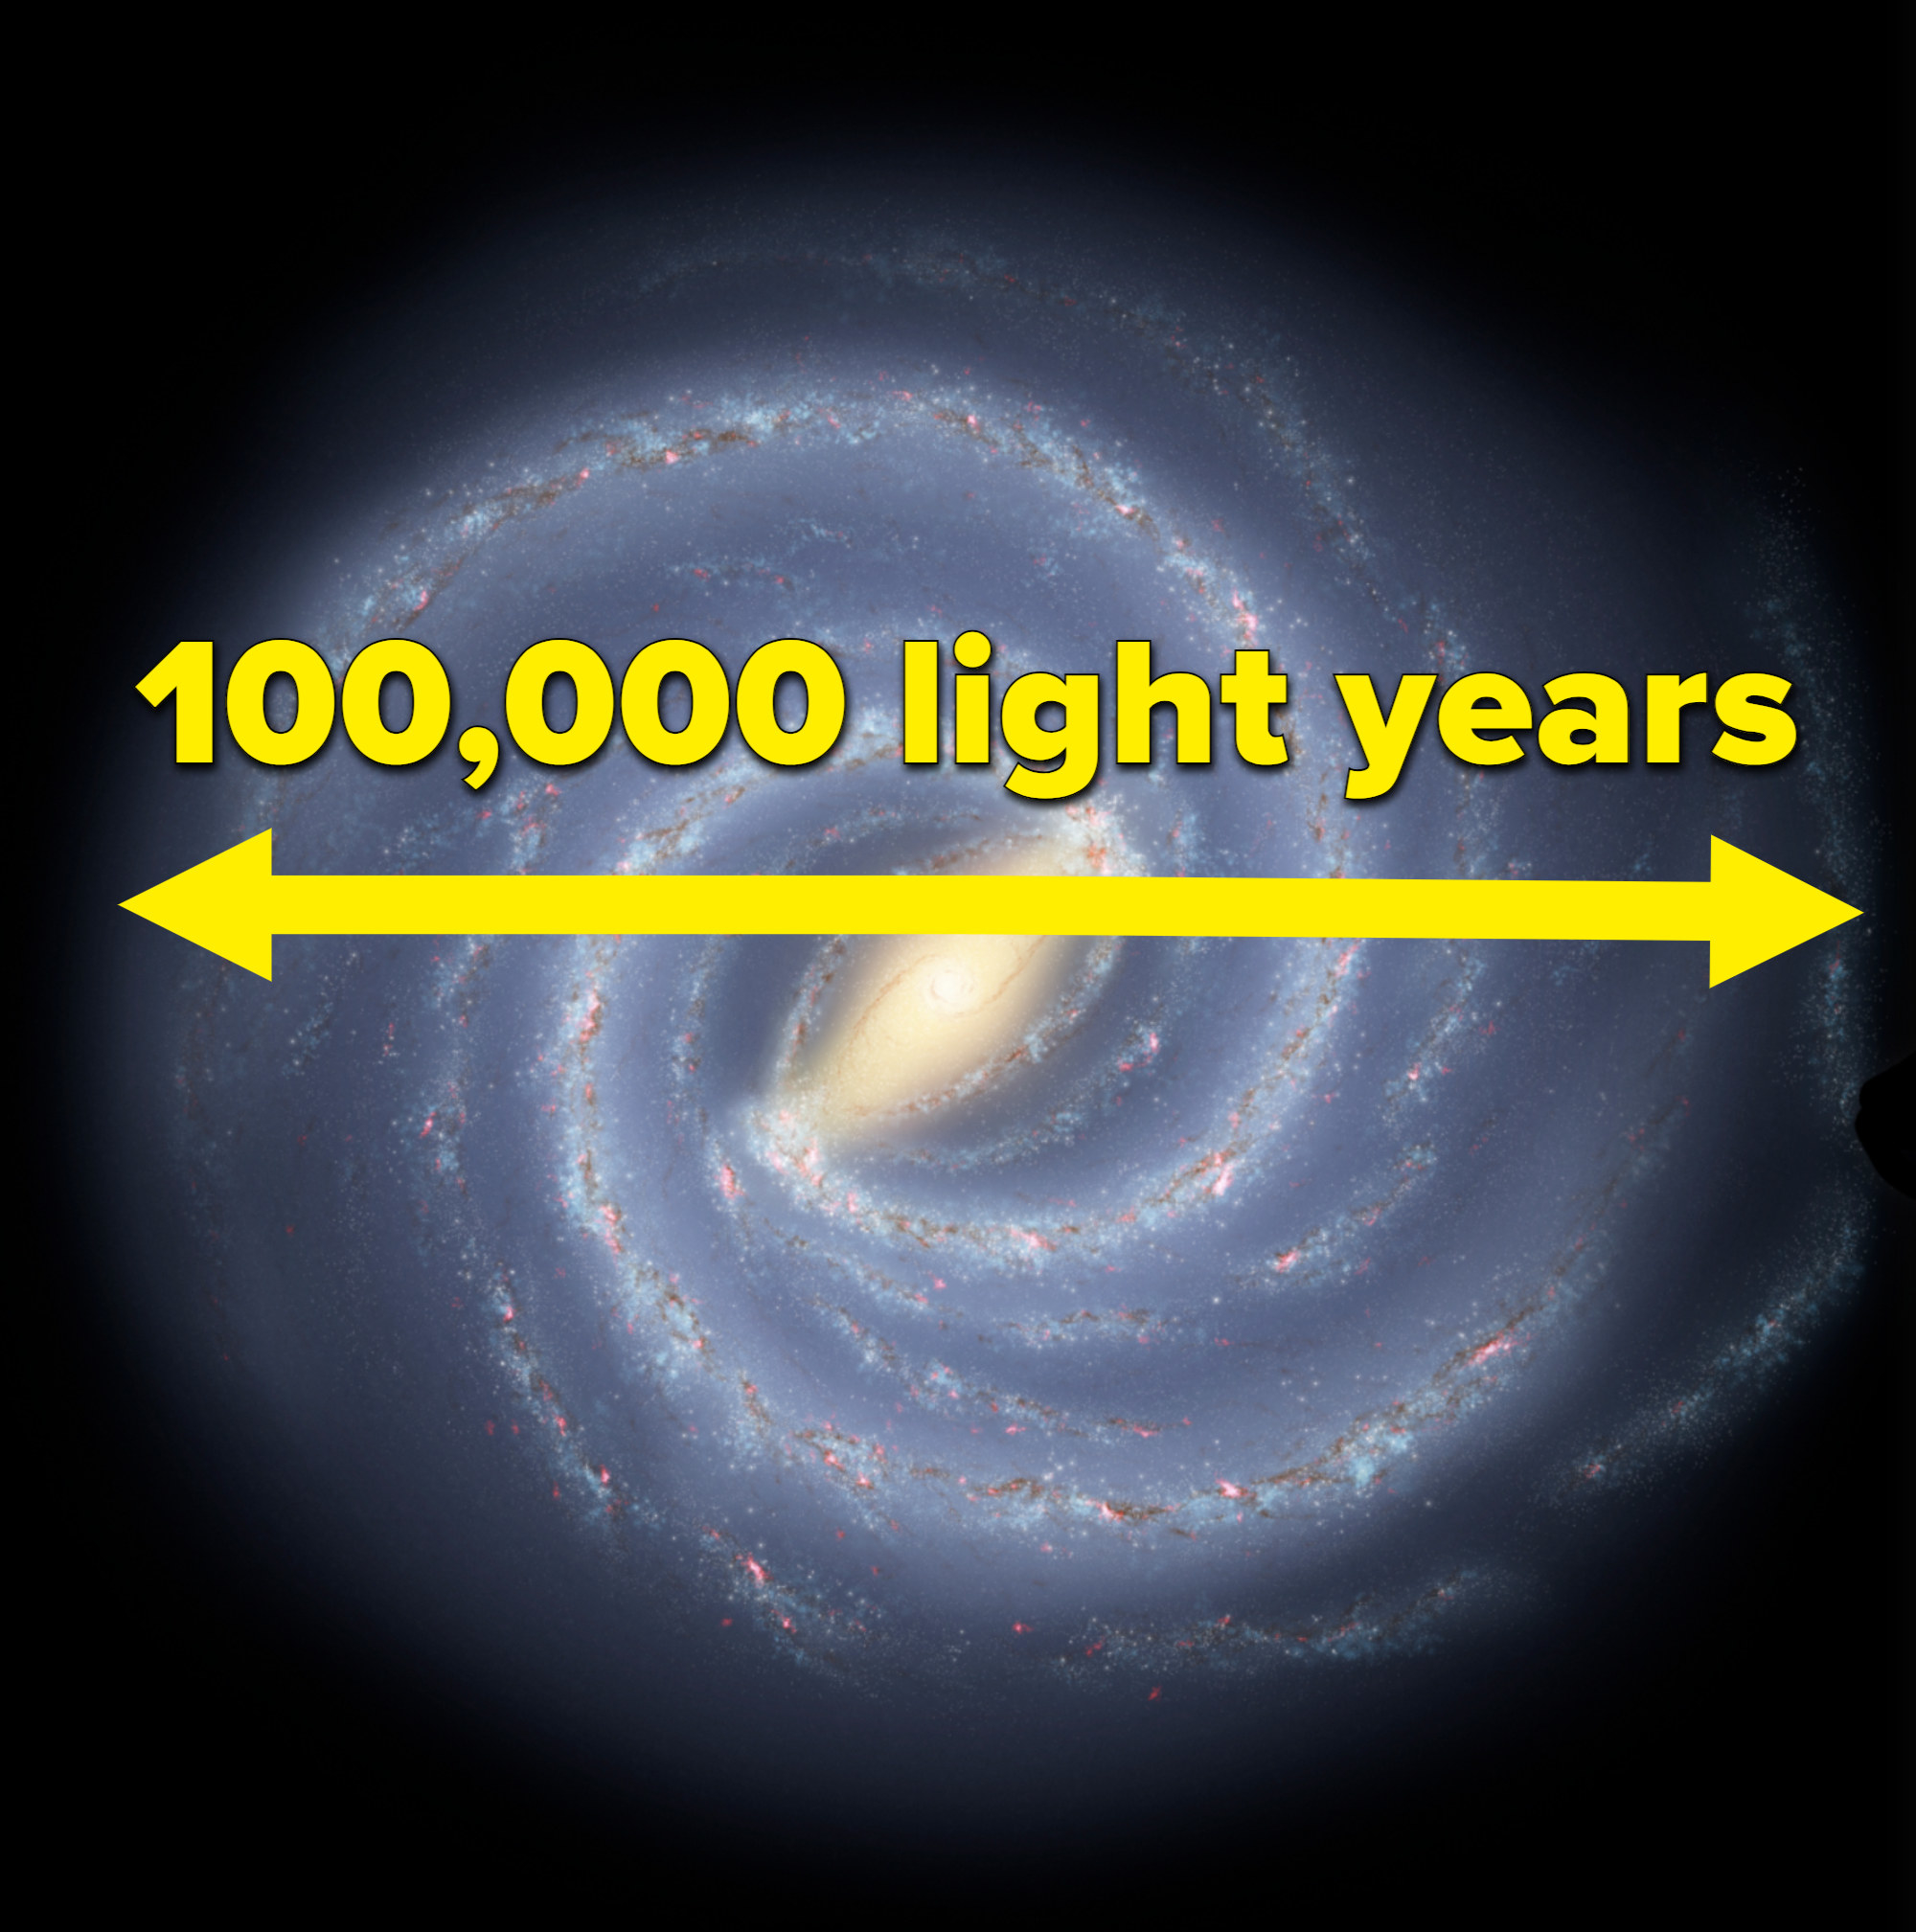 Span of the Milky Way